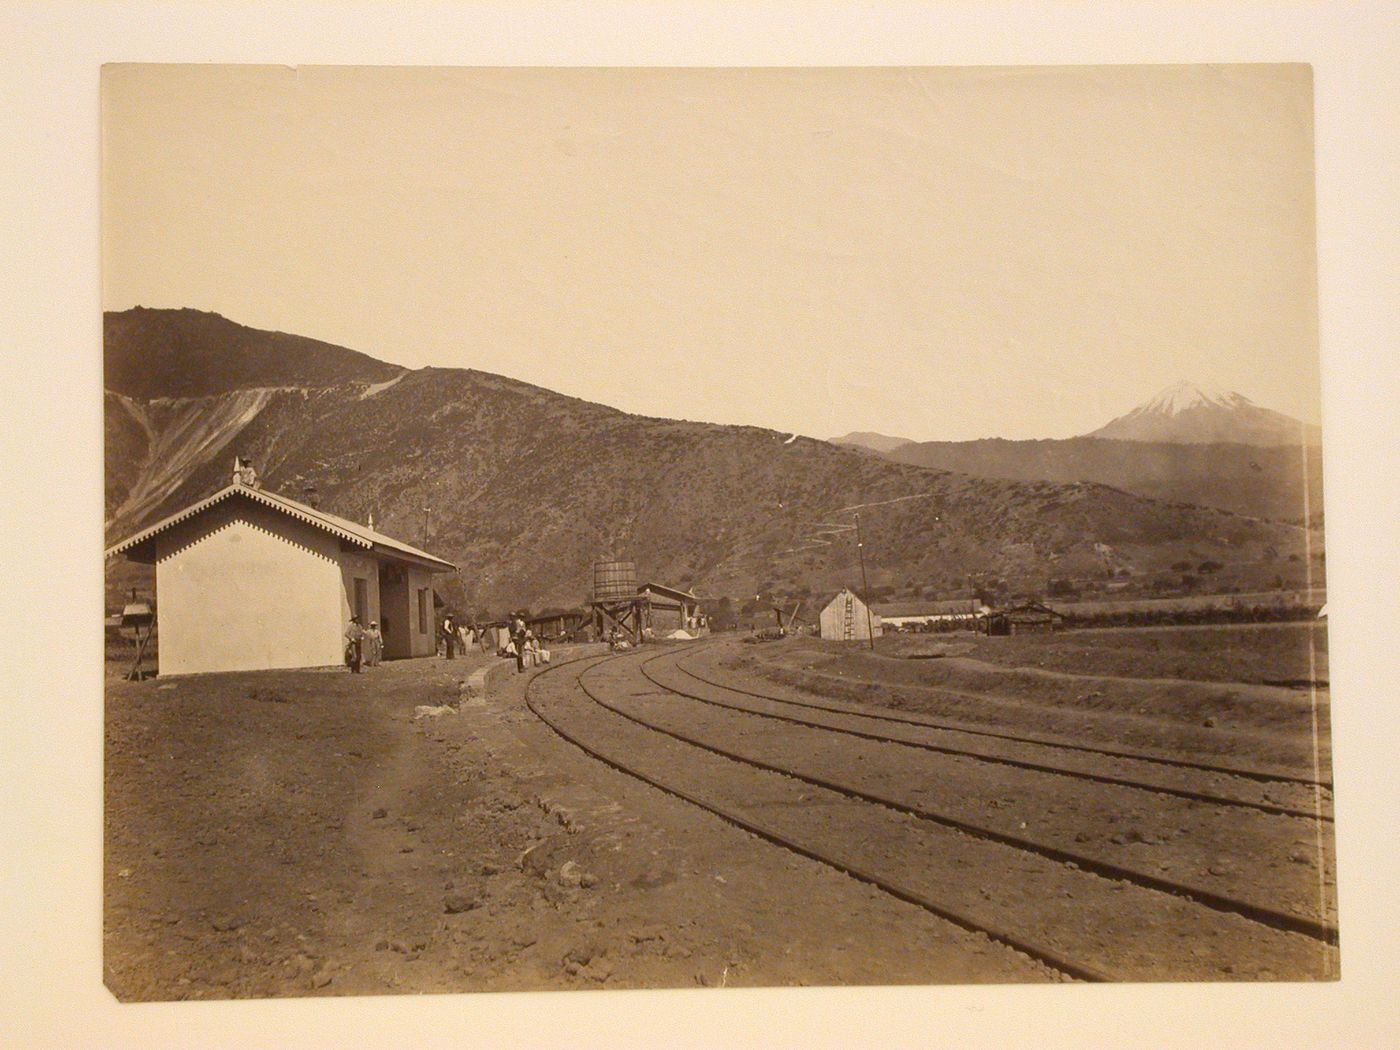 View of the Maltrata railway station showing men and a water tower [?] with mountains and the Pico de Orizaba Volcano in the background, Mexico